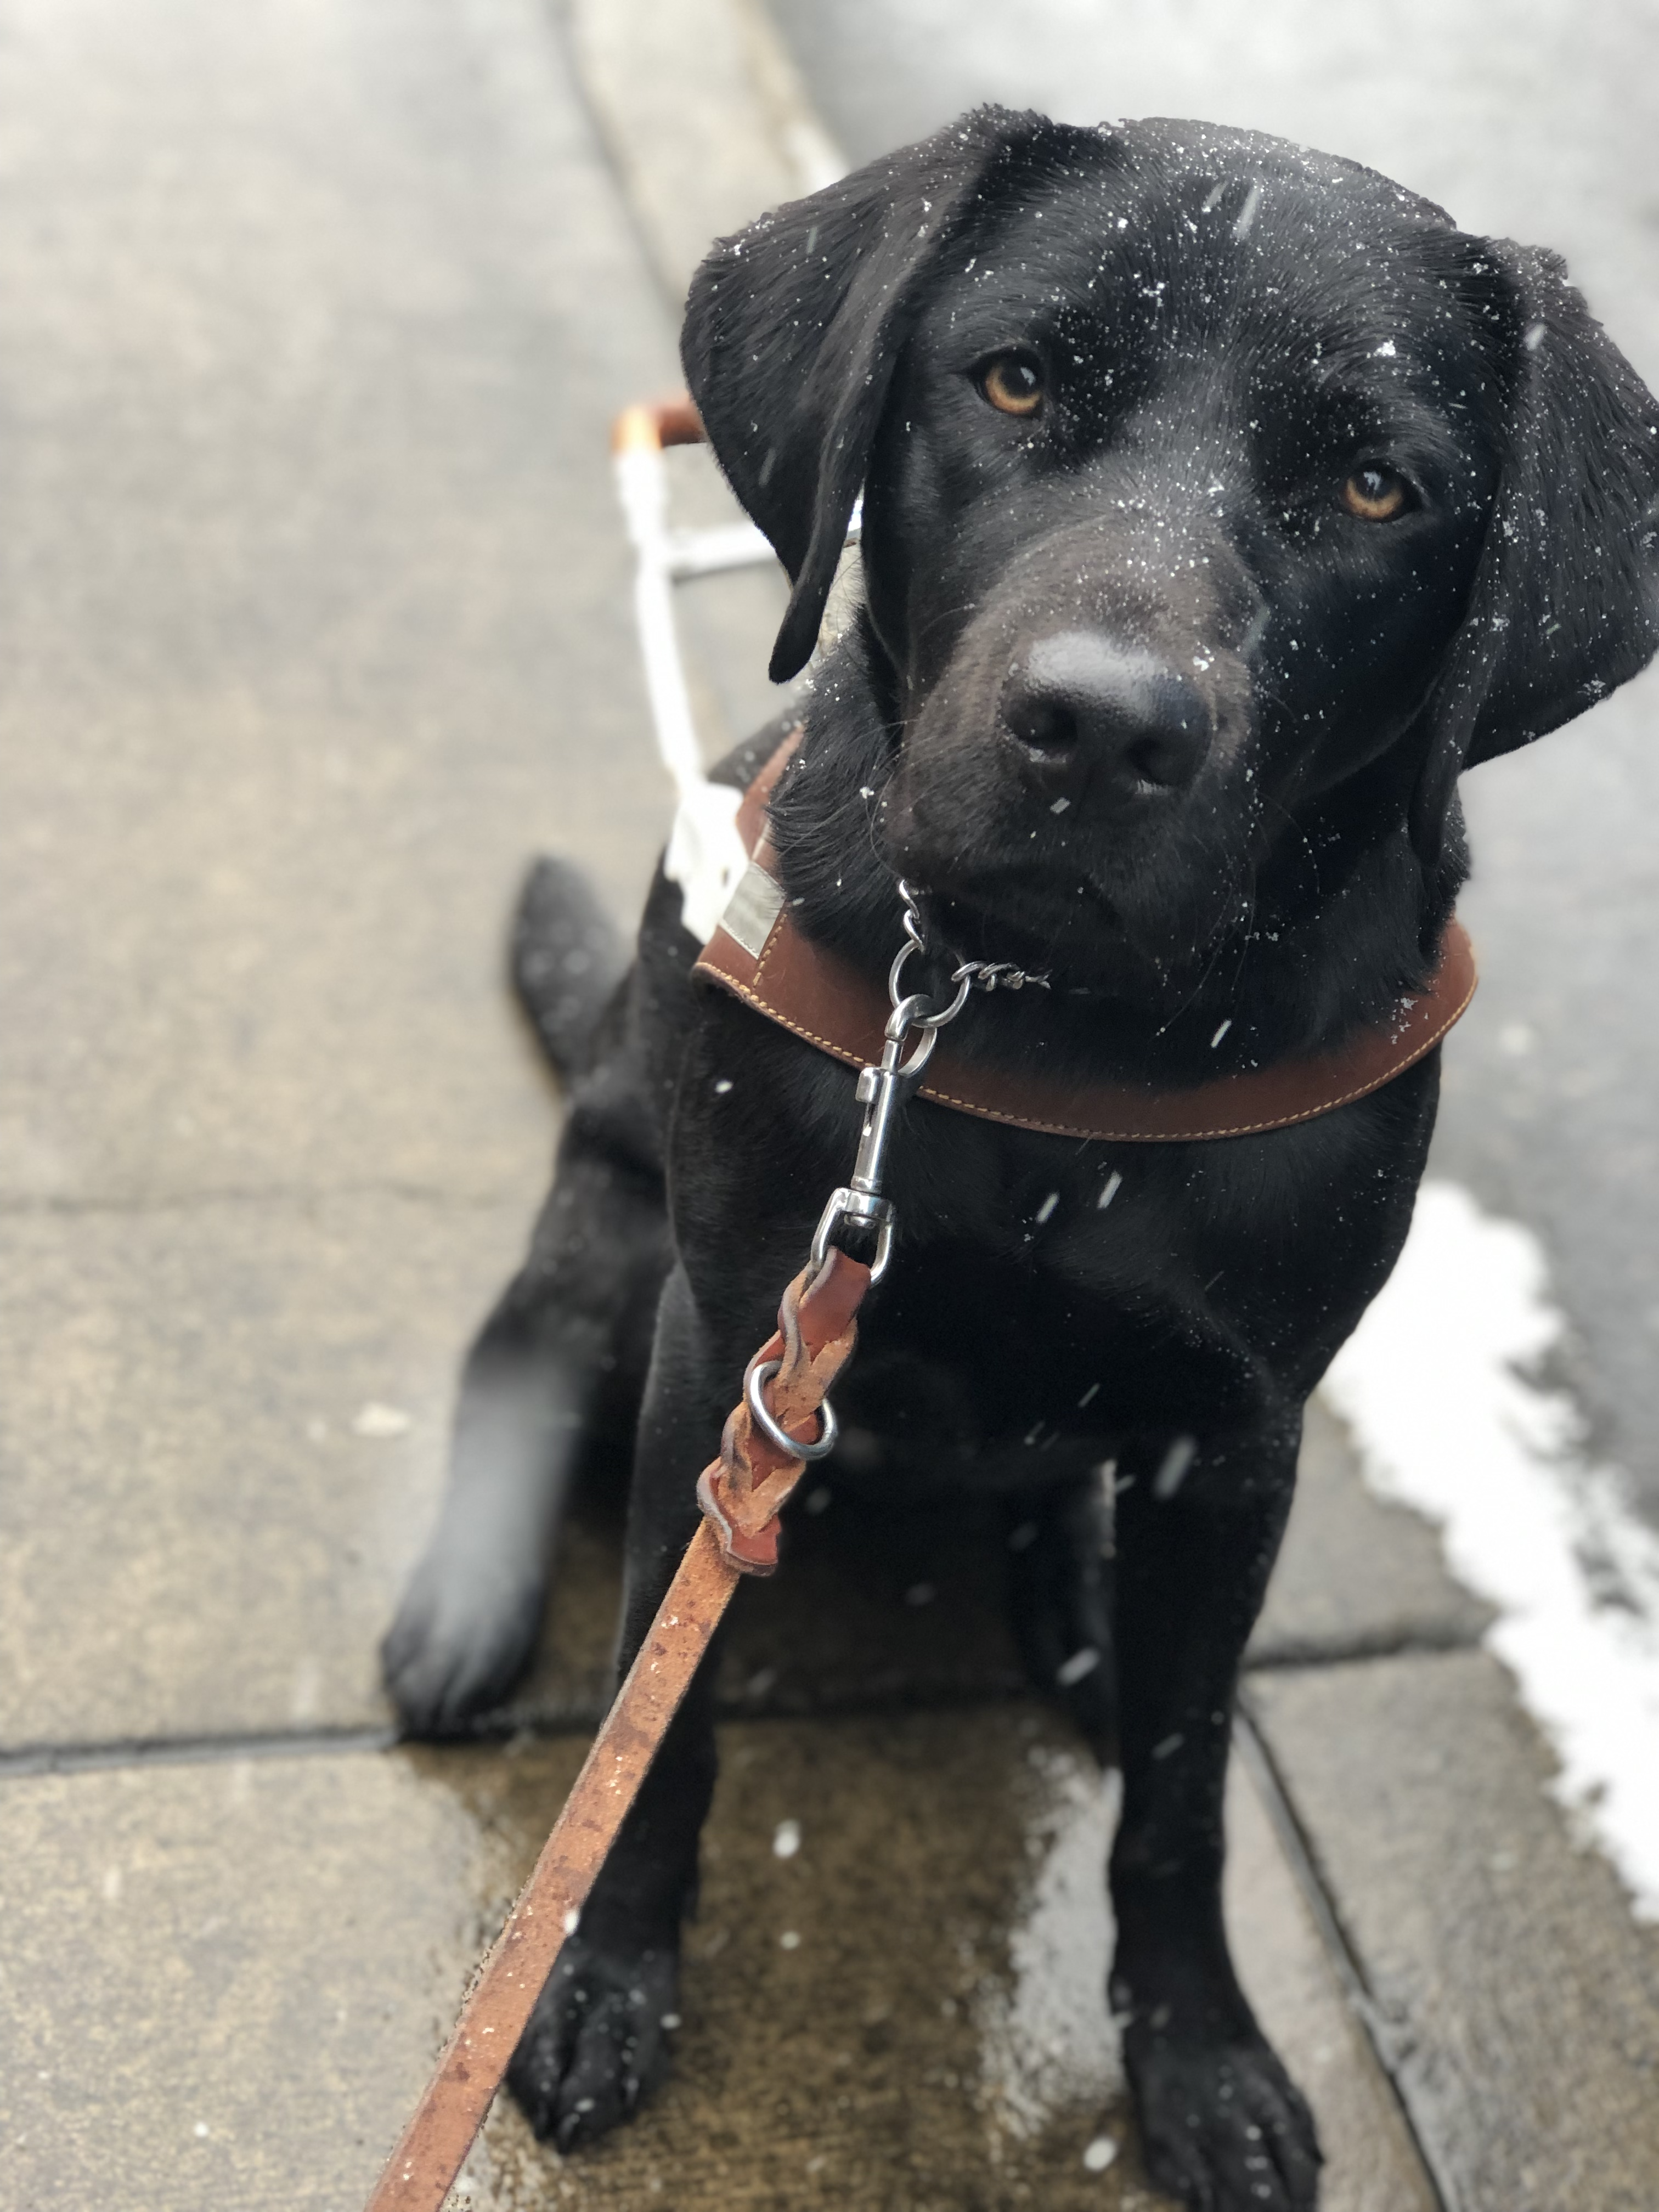 A black Lab guide dog sprinkled with fresh-falling snow.